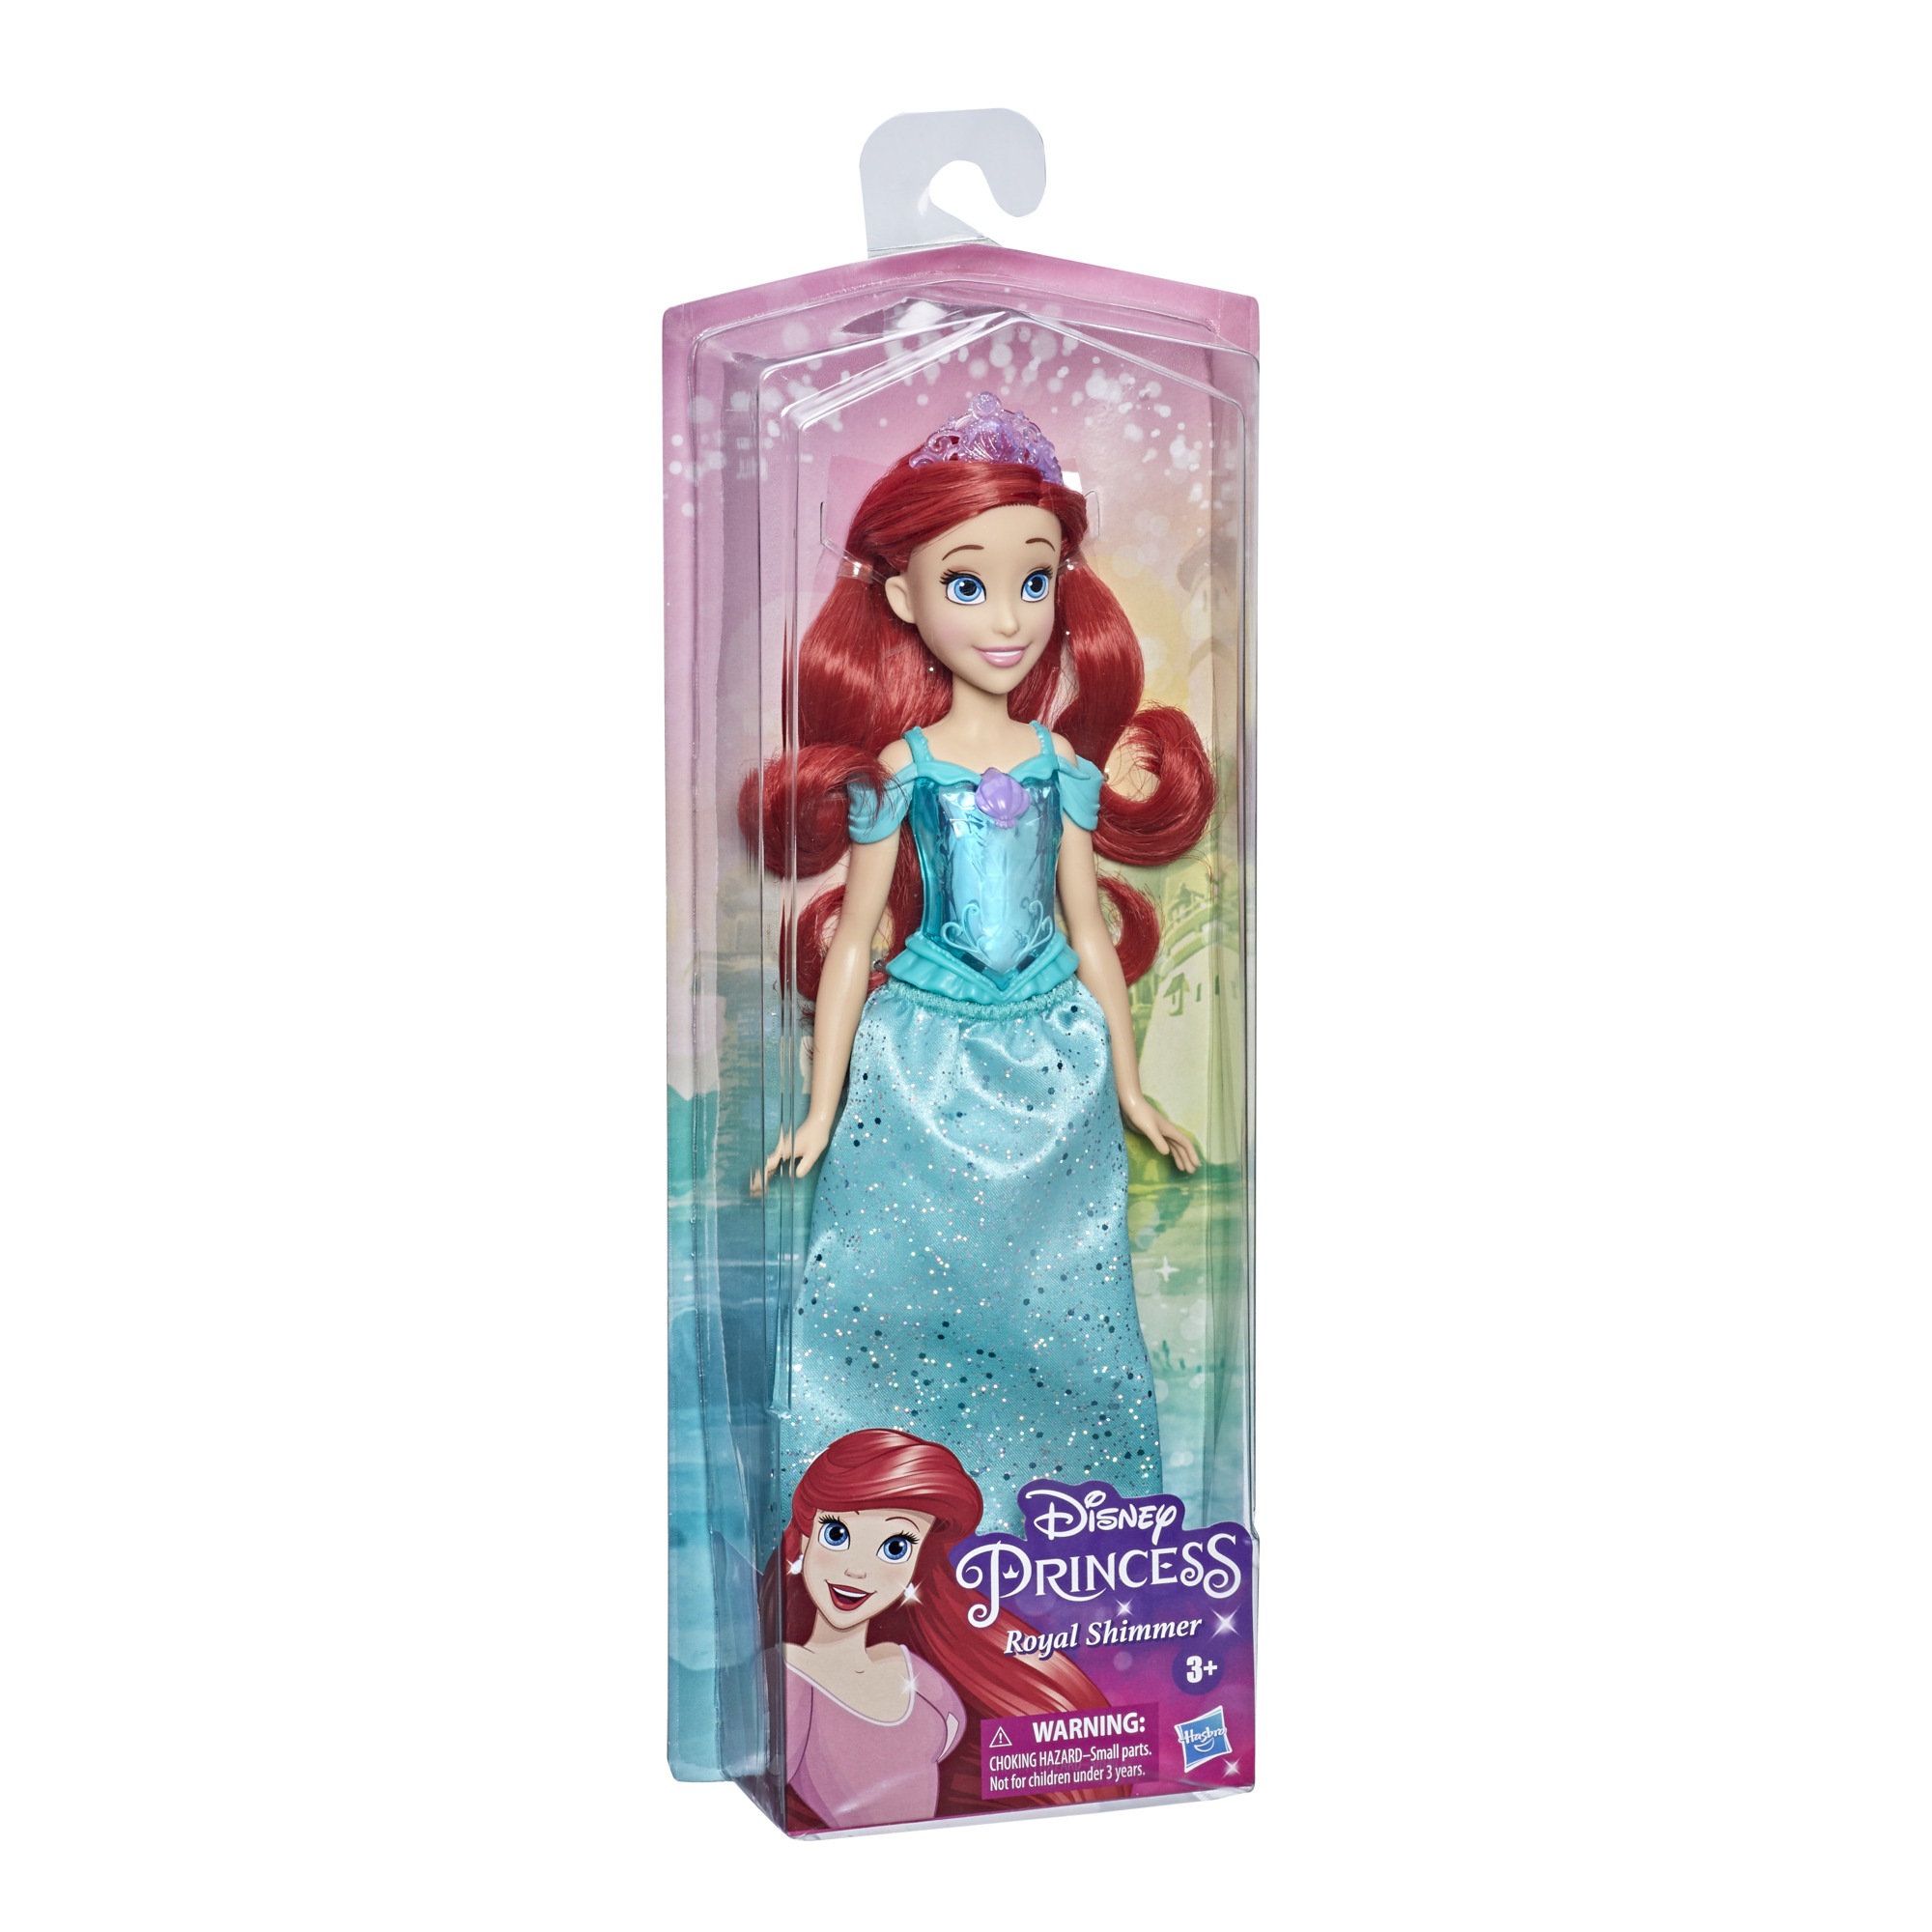 Disney Princess Royal Shimmer Ariel Doll, Fashion Doll with Skirt and Accessories, Toy for Kids Ages 3 and Up - image 4 of 5